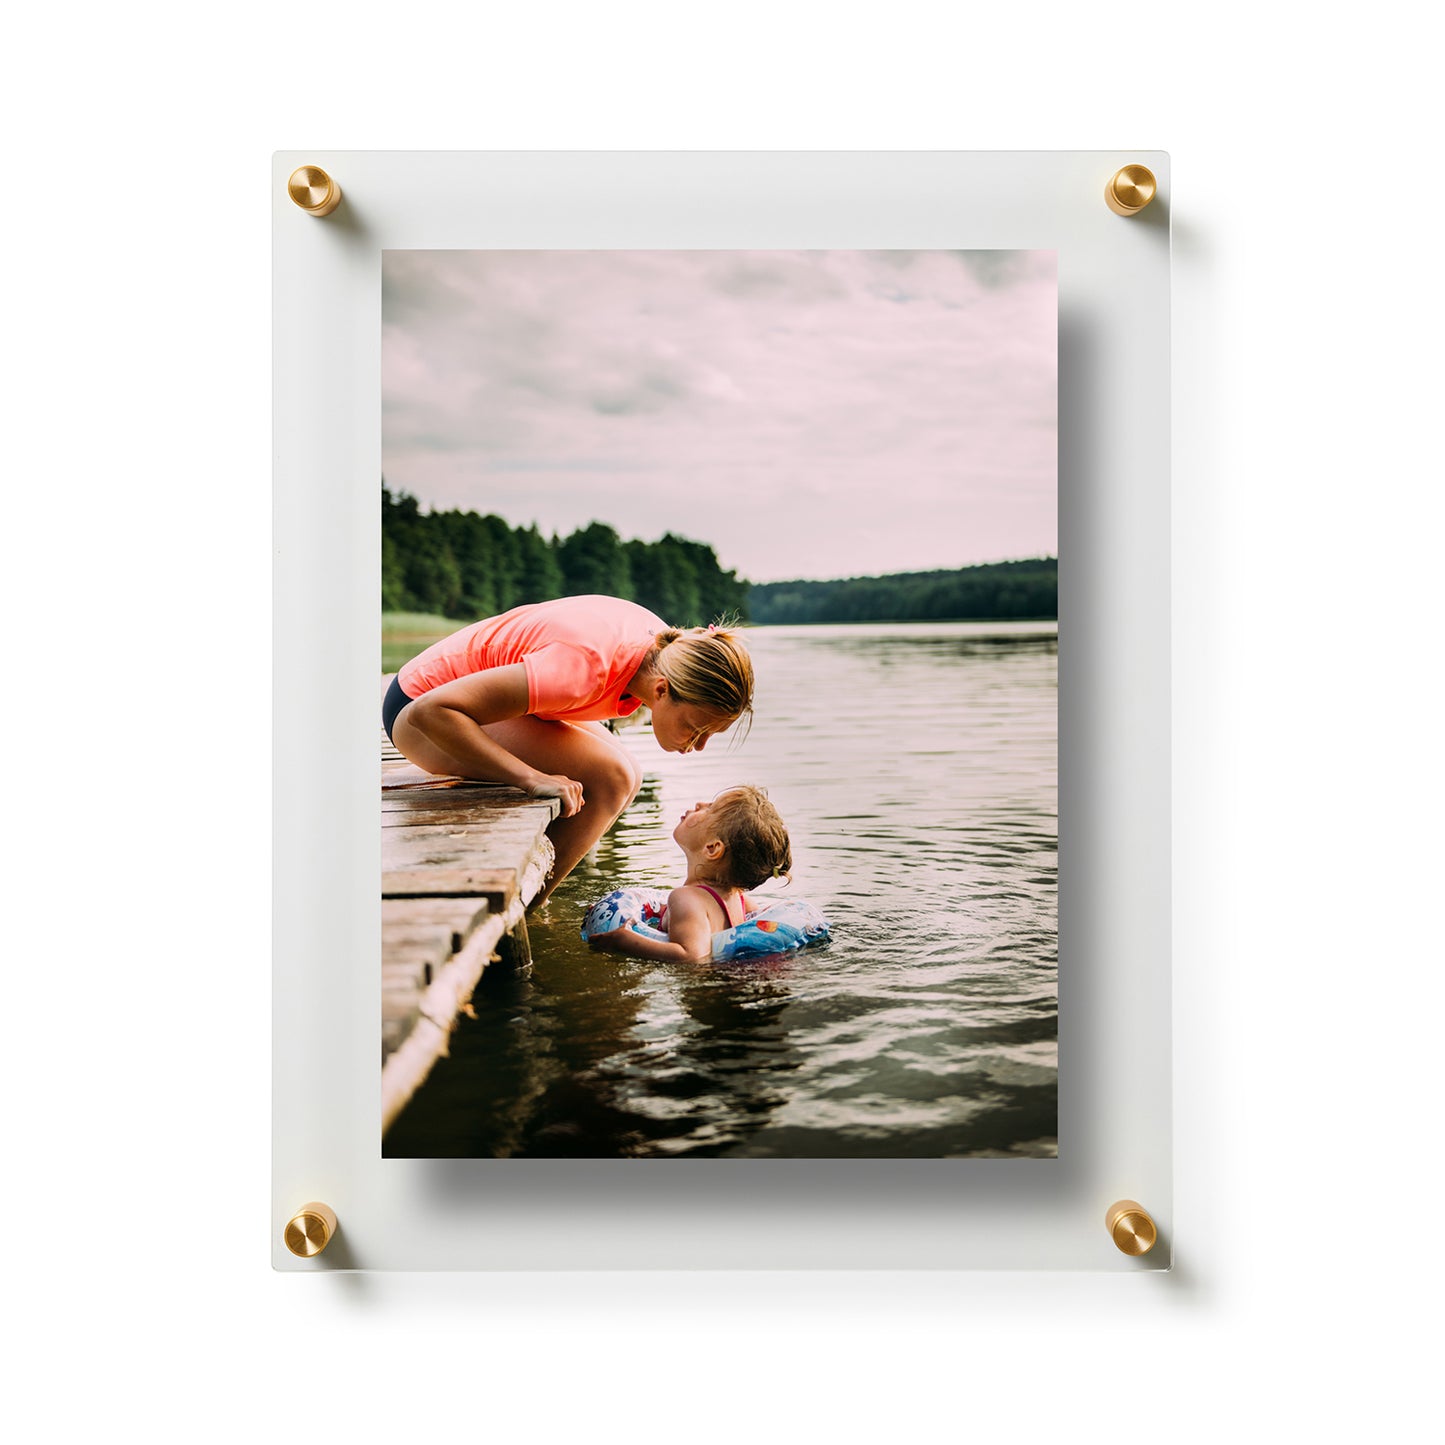 8x10" Photo Floating Acrylic Clear Picture Frame (Frame Size 12x15")